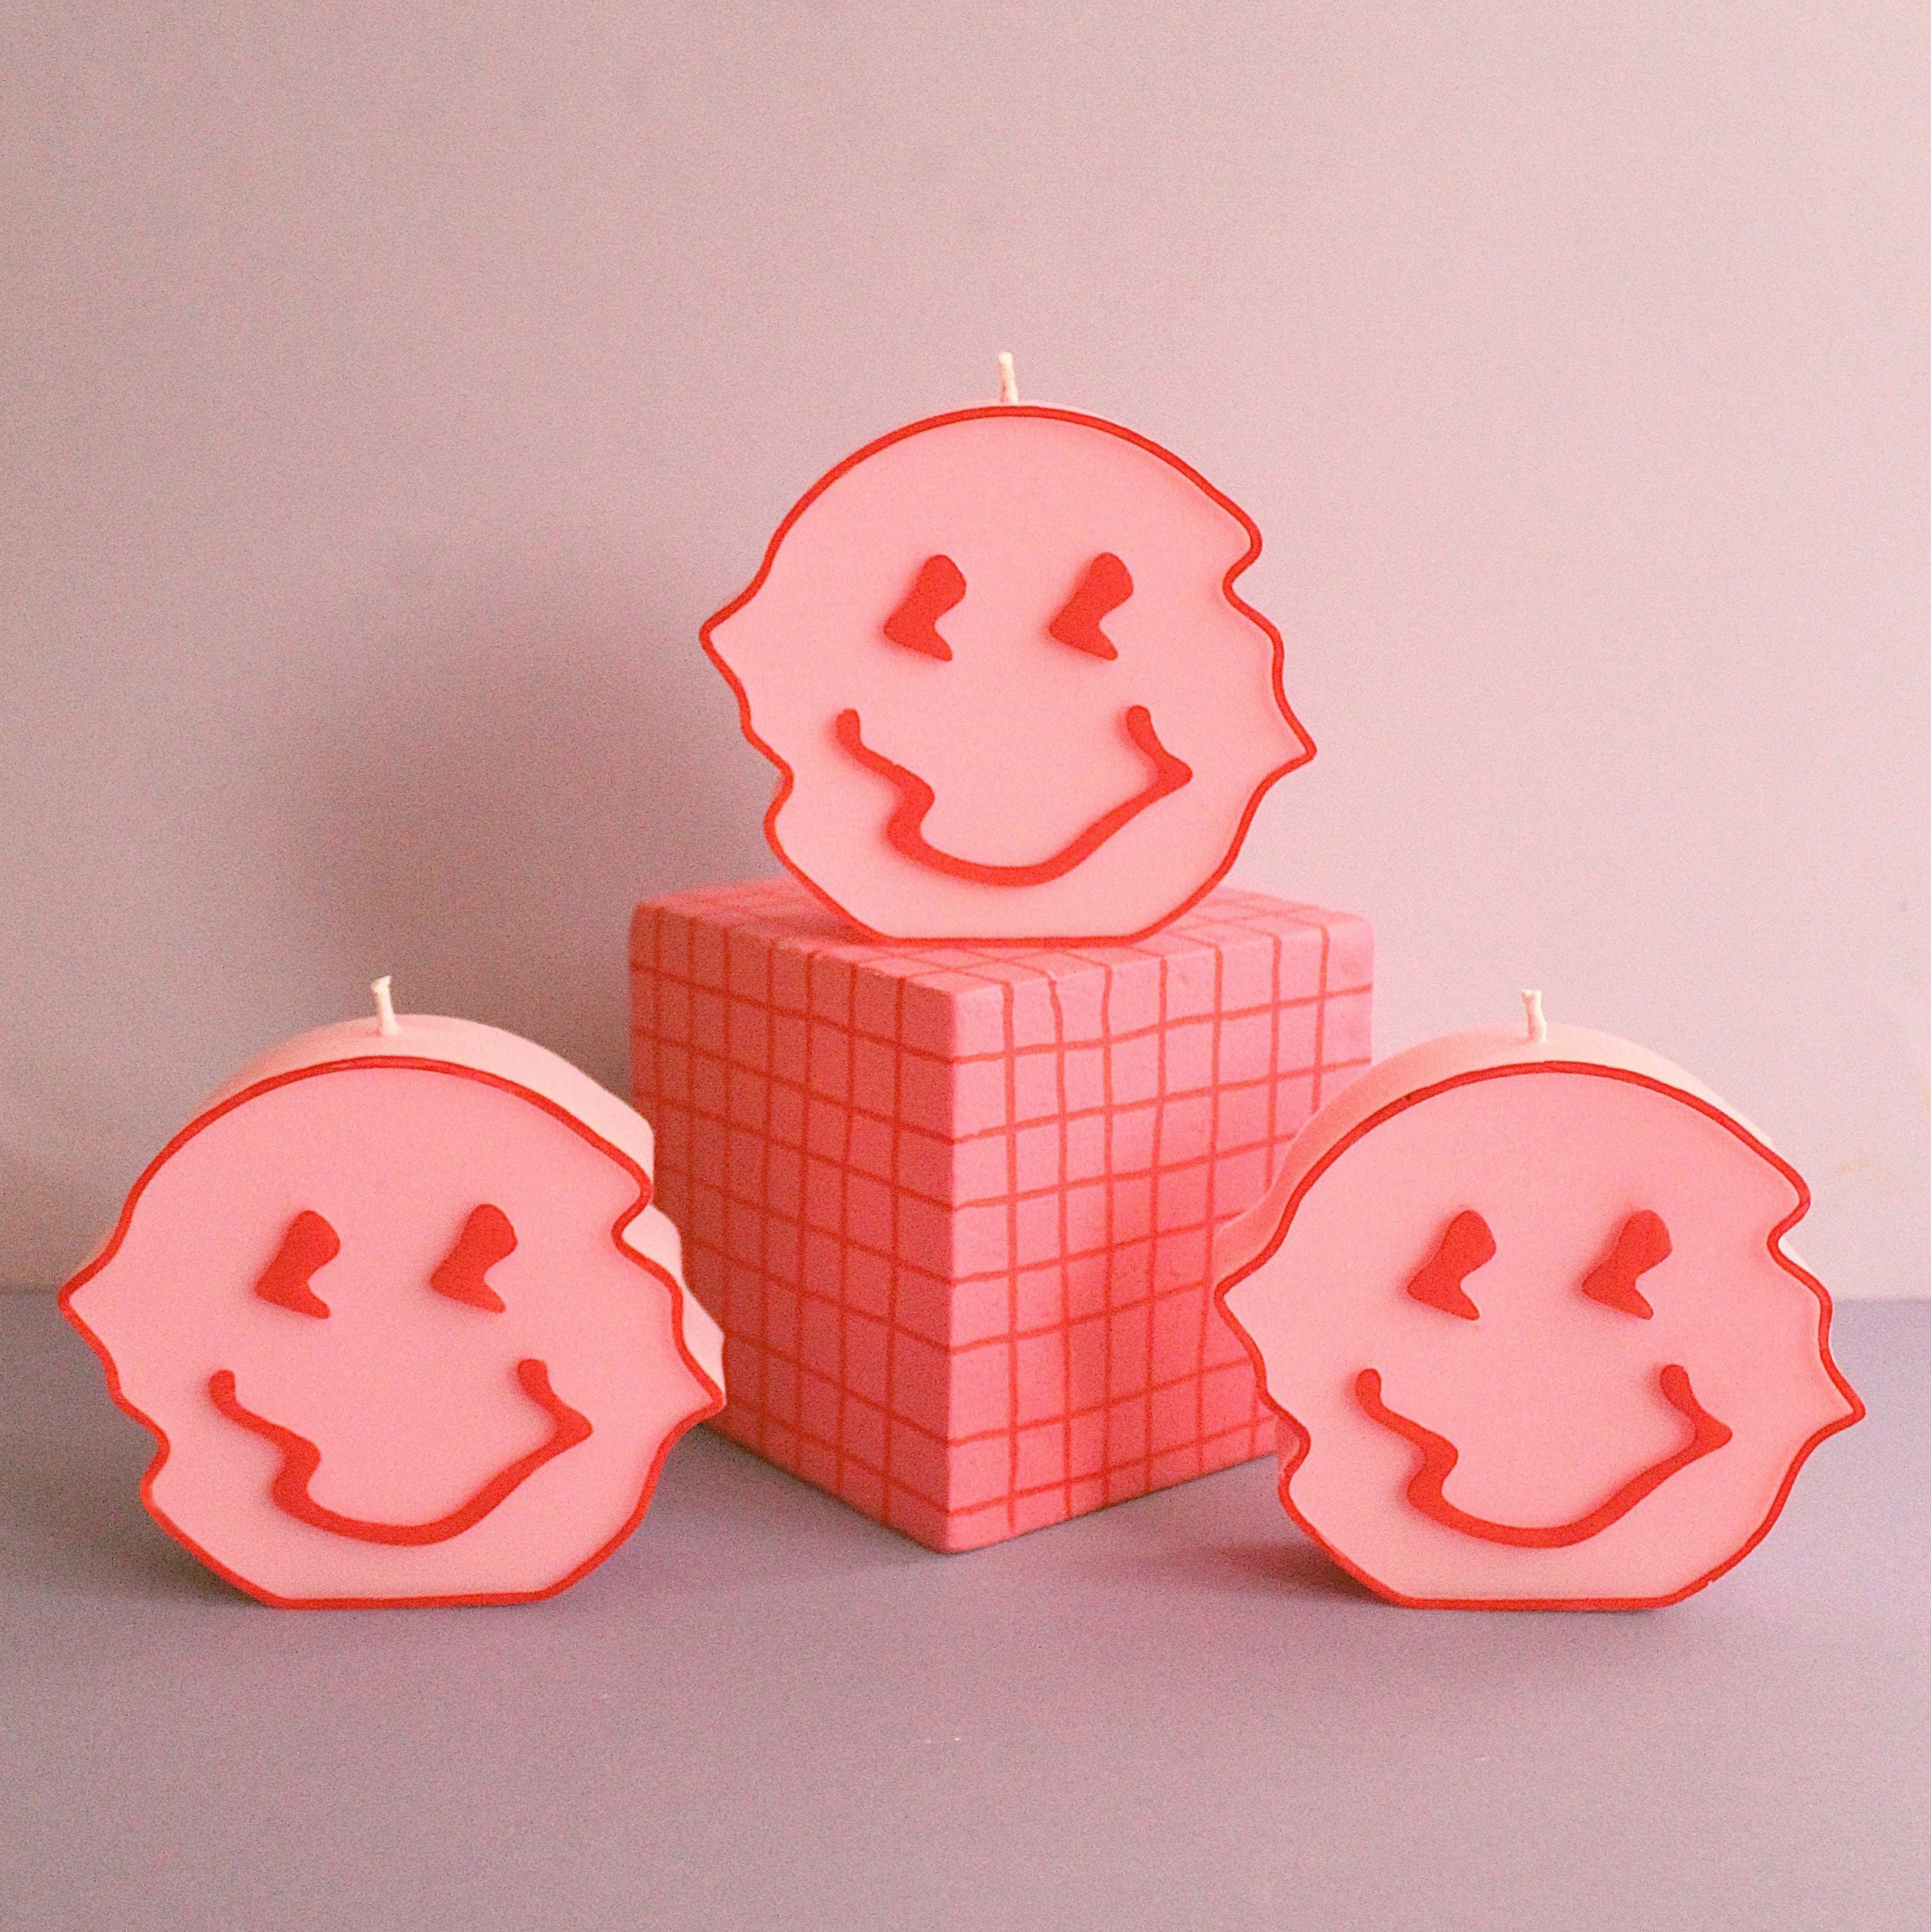 Funky Cute Windy Smile Face Candle Mold,smiley Sun Floral Candles Silicone  Mold,plasterdiy for Makingunique Resin Art Cool Fun Homedecorgift 